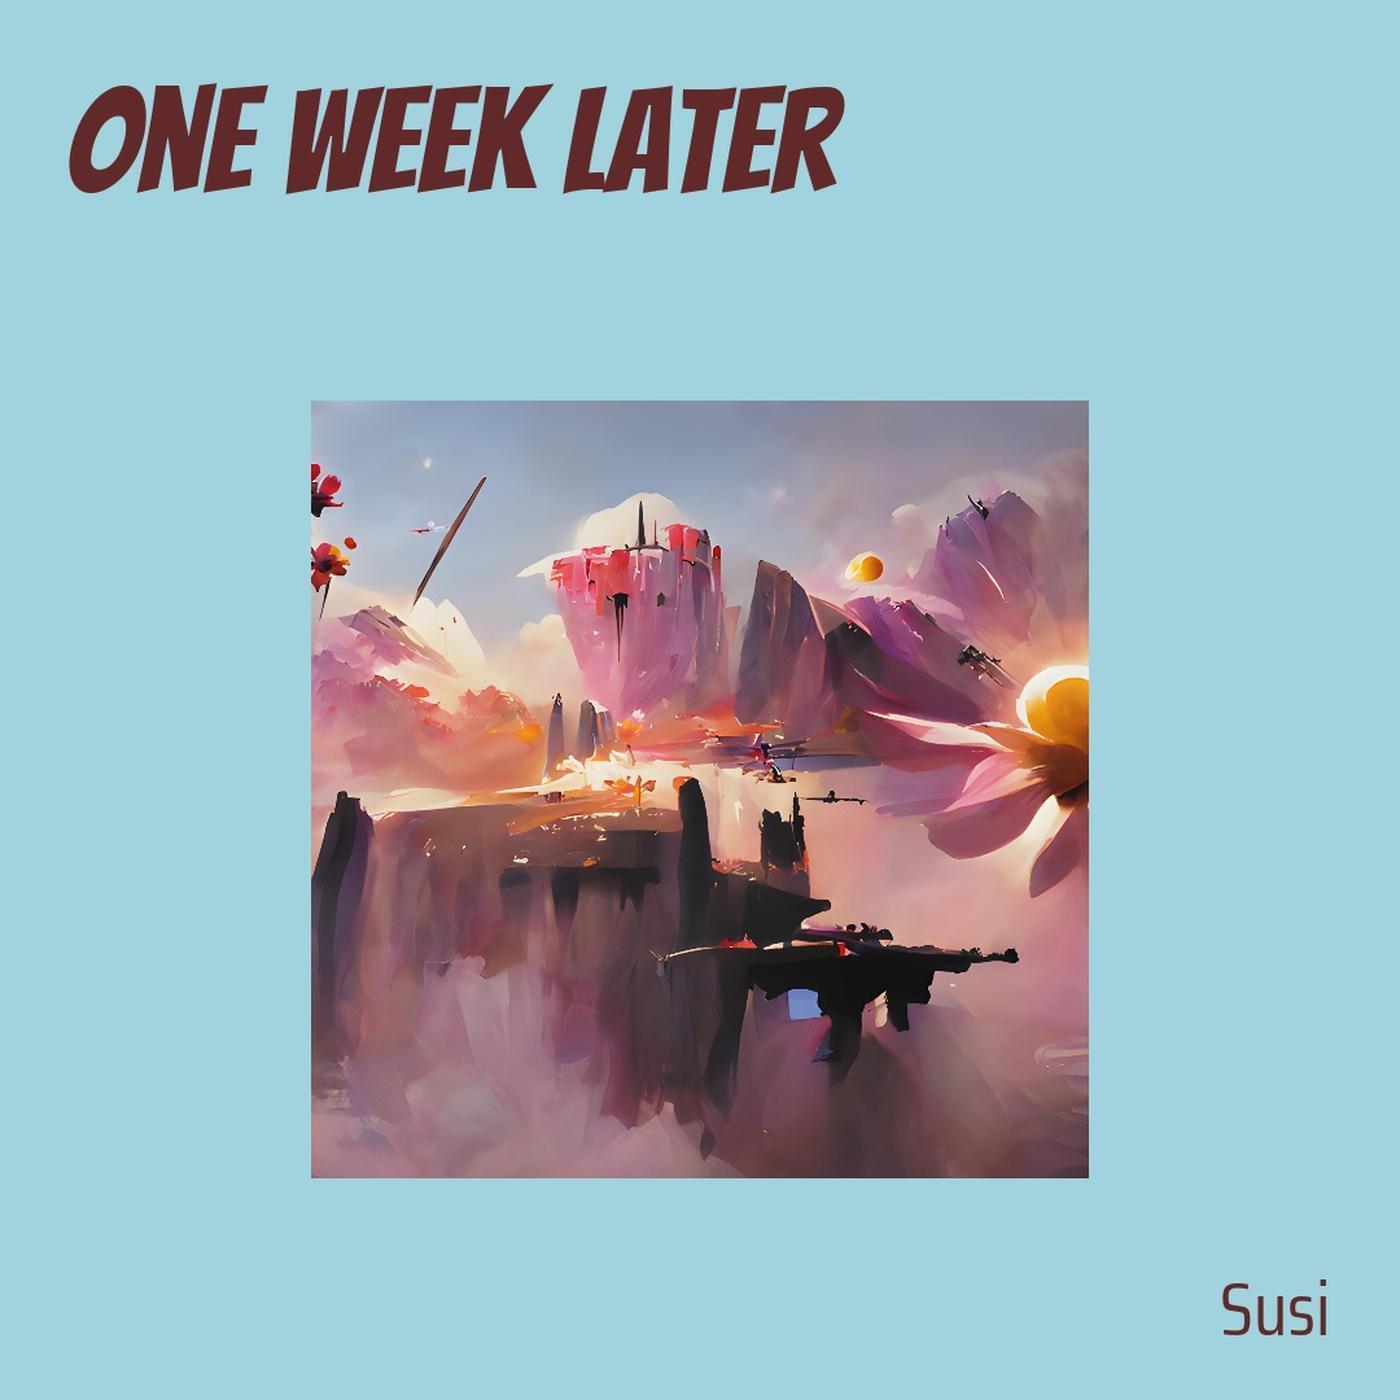 Susi - So Eat as Much as You Like